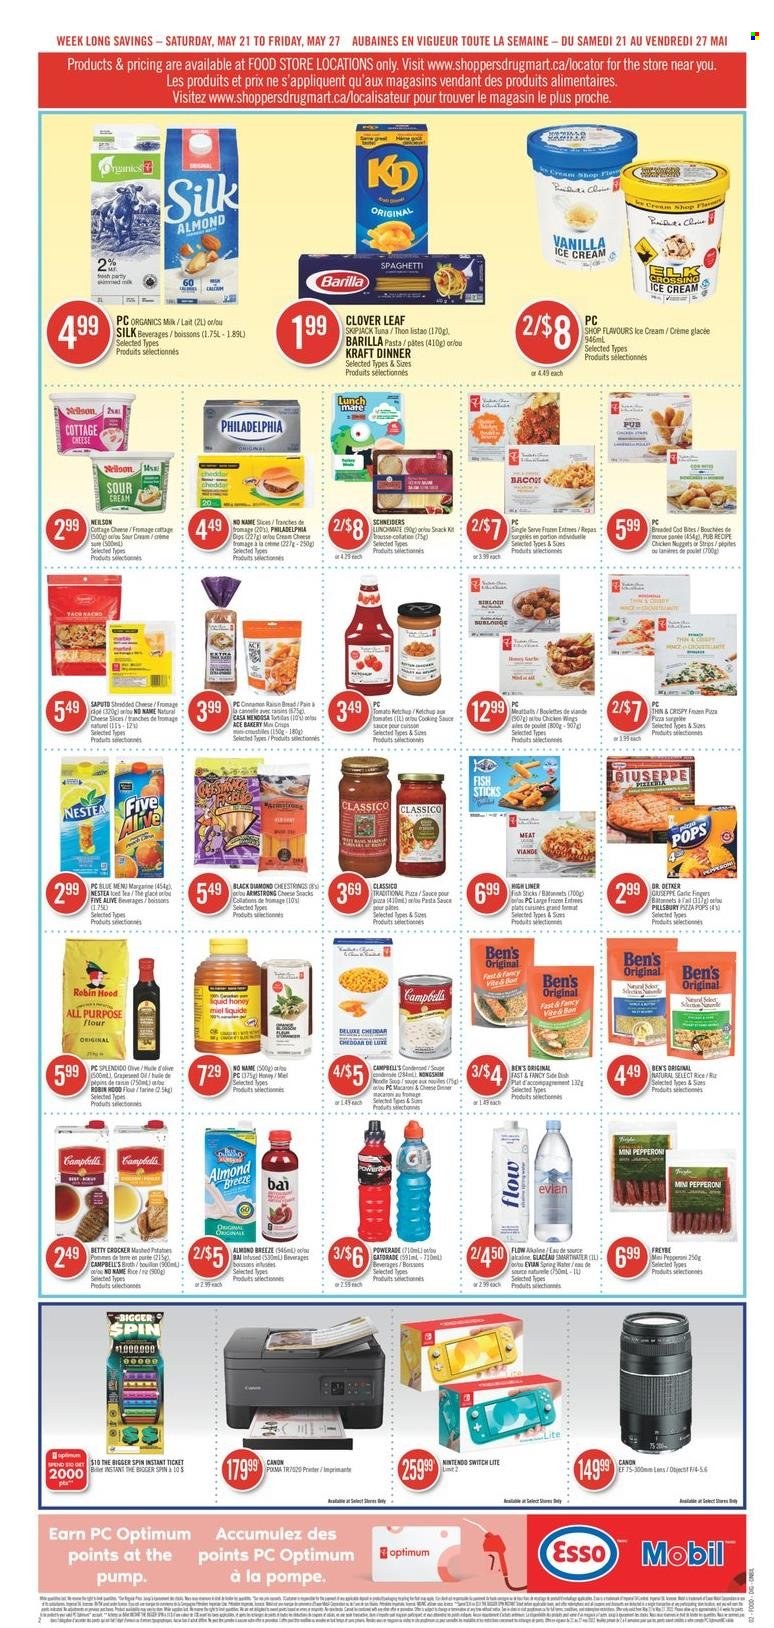 thumbnail - Shoppers Drug Mart Flyer - May 21, 2022 - May 27, 2022 - Sales products - Nintendo Switch, ACE Bakery, cod, tuna, fish, fish fingers, No Name, fish sticks, Campbell's, spaghetti, pizza, pasta sauce, soup, nuggets, sauce, Pillsbury, chicken nuggets, noodles cup, noodles, Kraft®, bacon, cottage cheese, cream cheese, sliced cheese, string cheese, cheddar, Dr. Oetker, Clover, Silk, Almond Breeze, margarine, sour cream, ice cream, snack, all purpose flour, bouillon, flour, broth, pepper, cinnamon, Classico, honey, Powerade, Bai, Gatorade, spring water, Smartwater, Evian, tea, pot, Optimum, lens, printer, Canon, ketchup, Philadelphia, Barilla. Page 5.